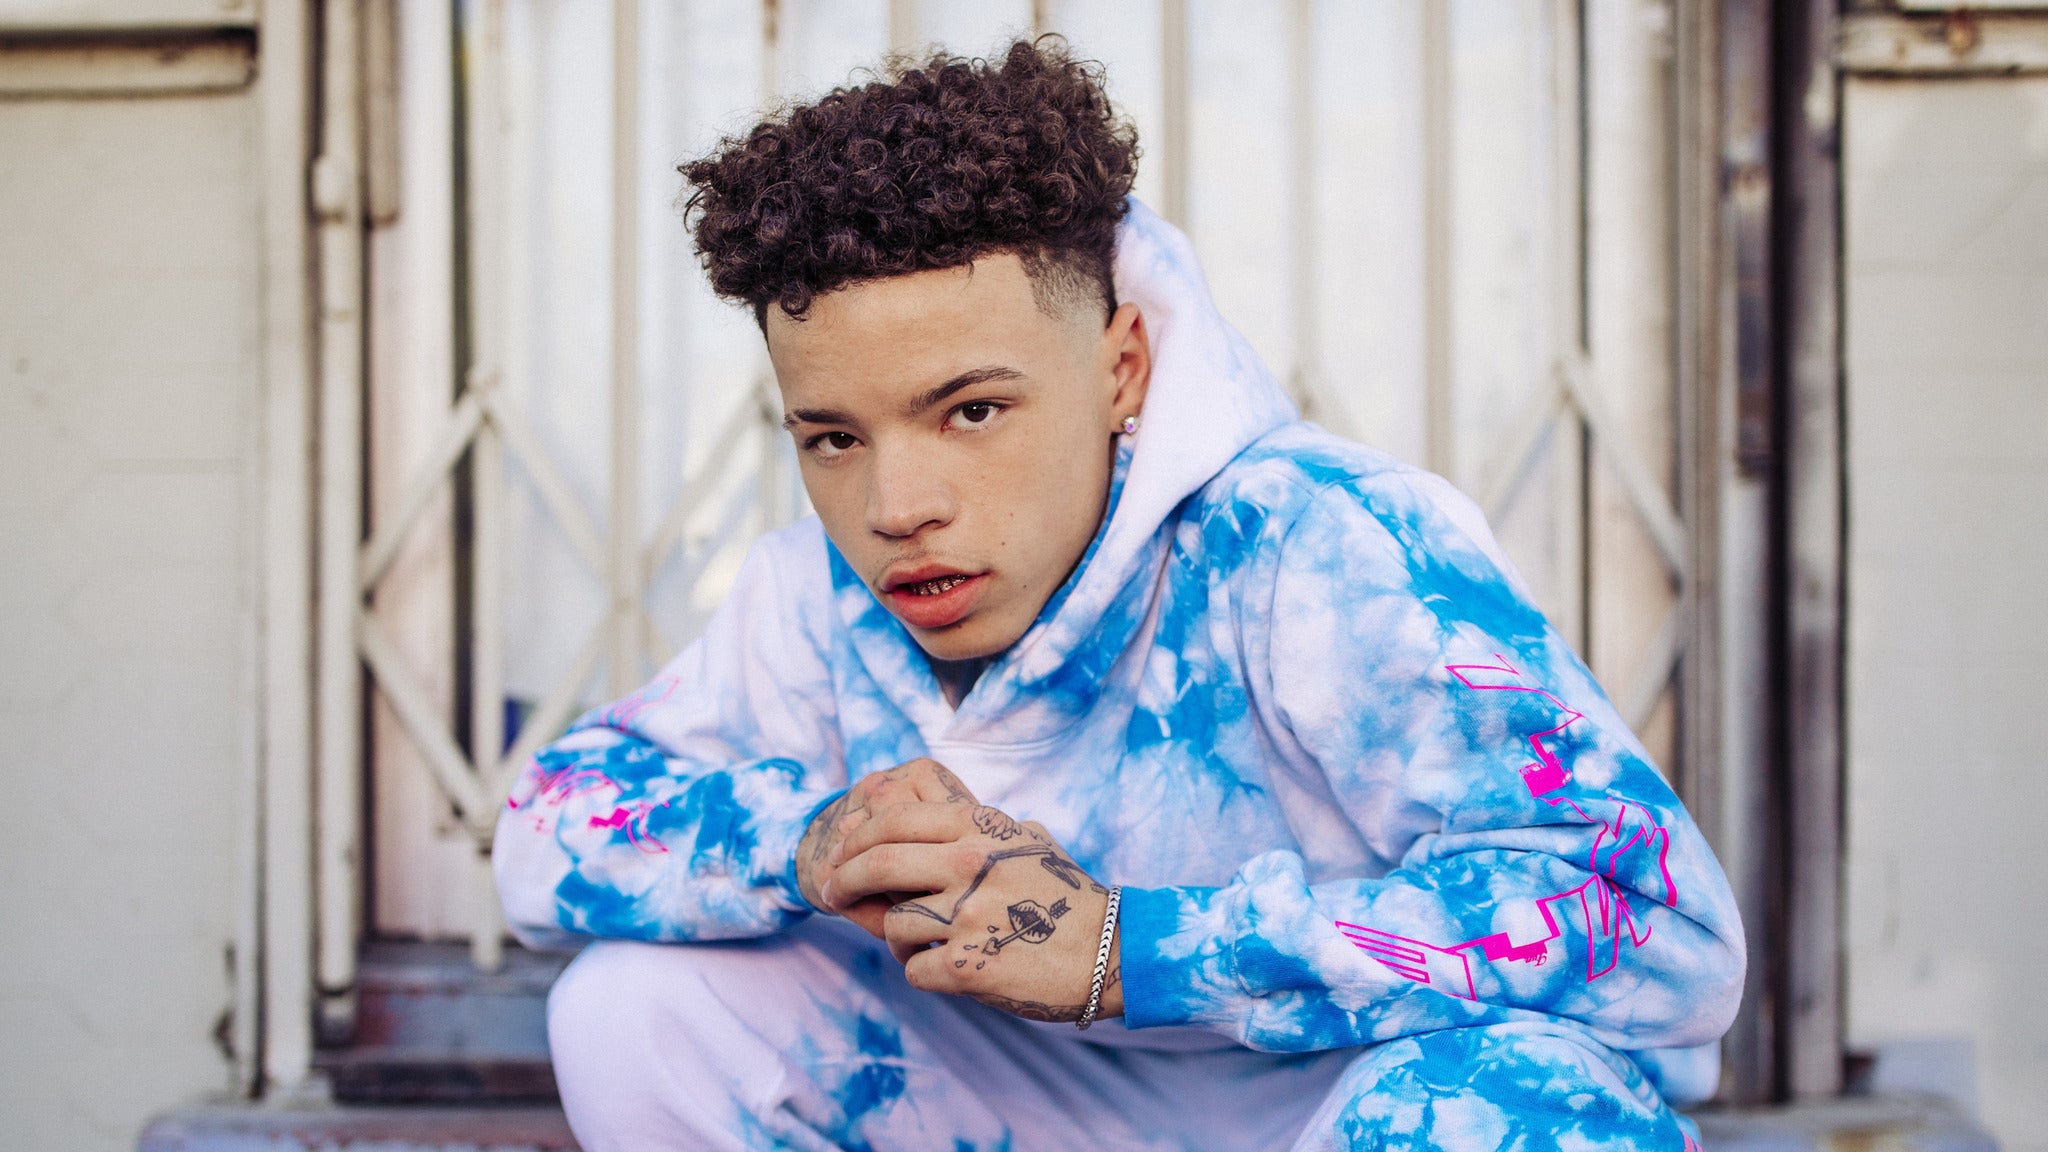 Lil Mosey - Certified Hitmaker North American Tour 2020 in New York promo photo for Ava Package presale offer code